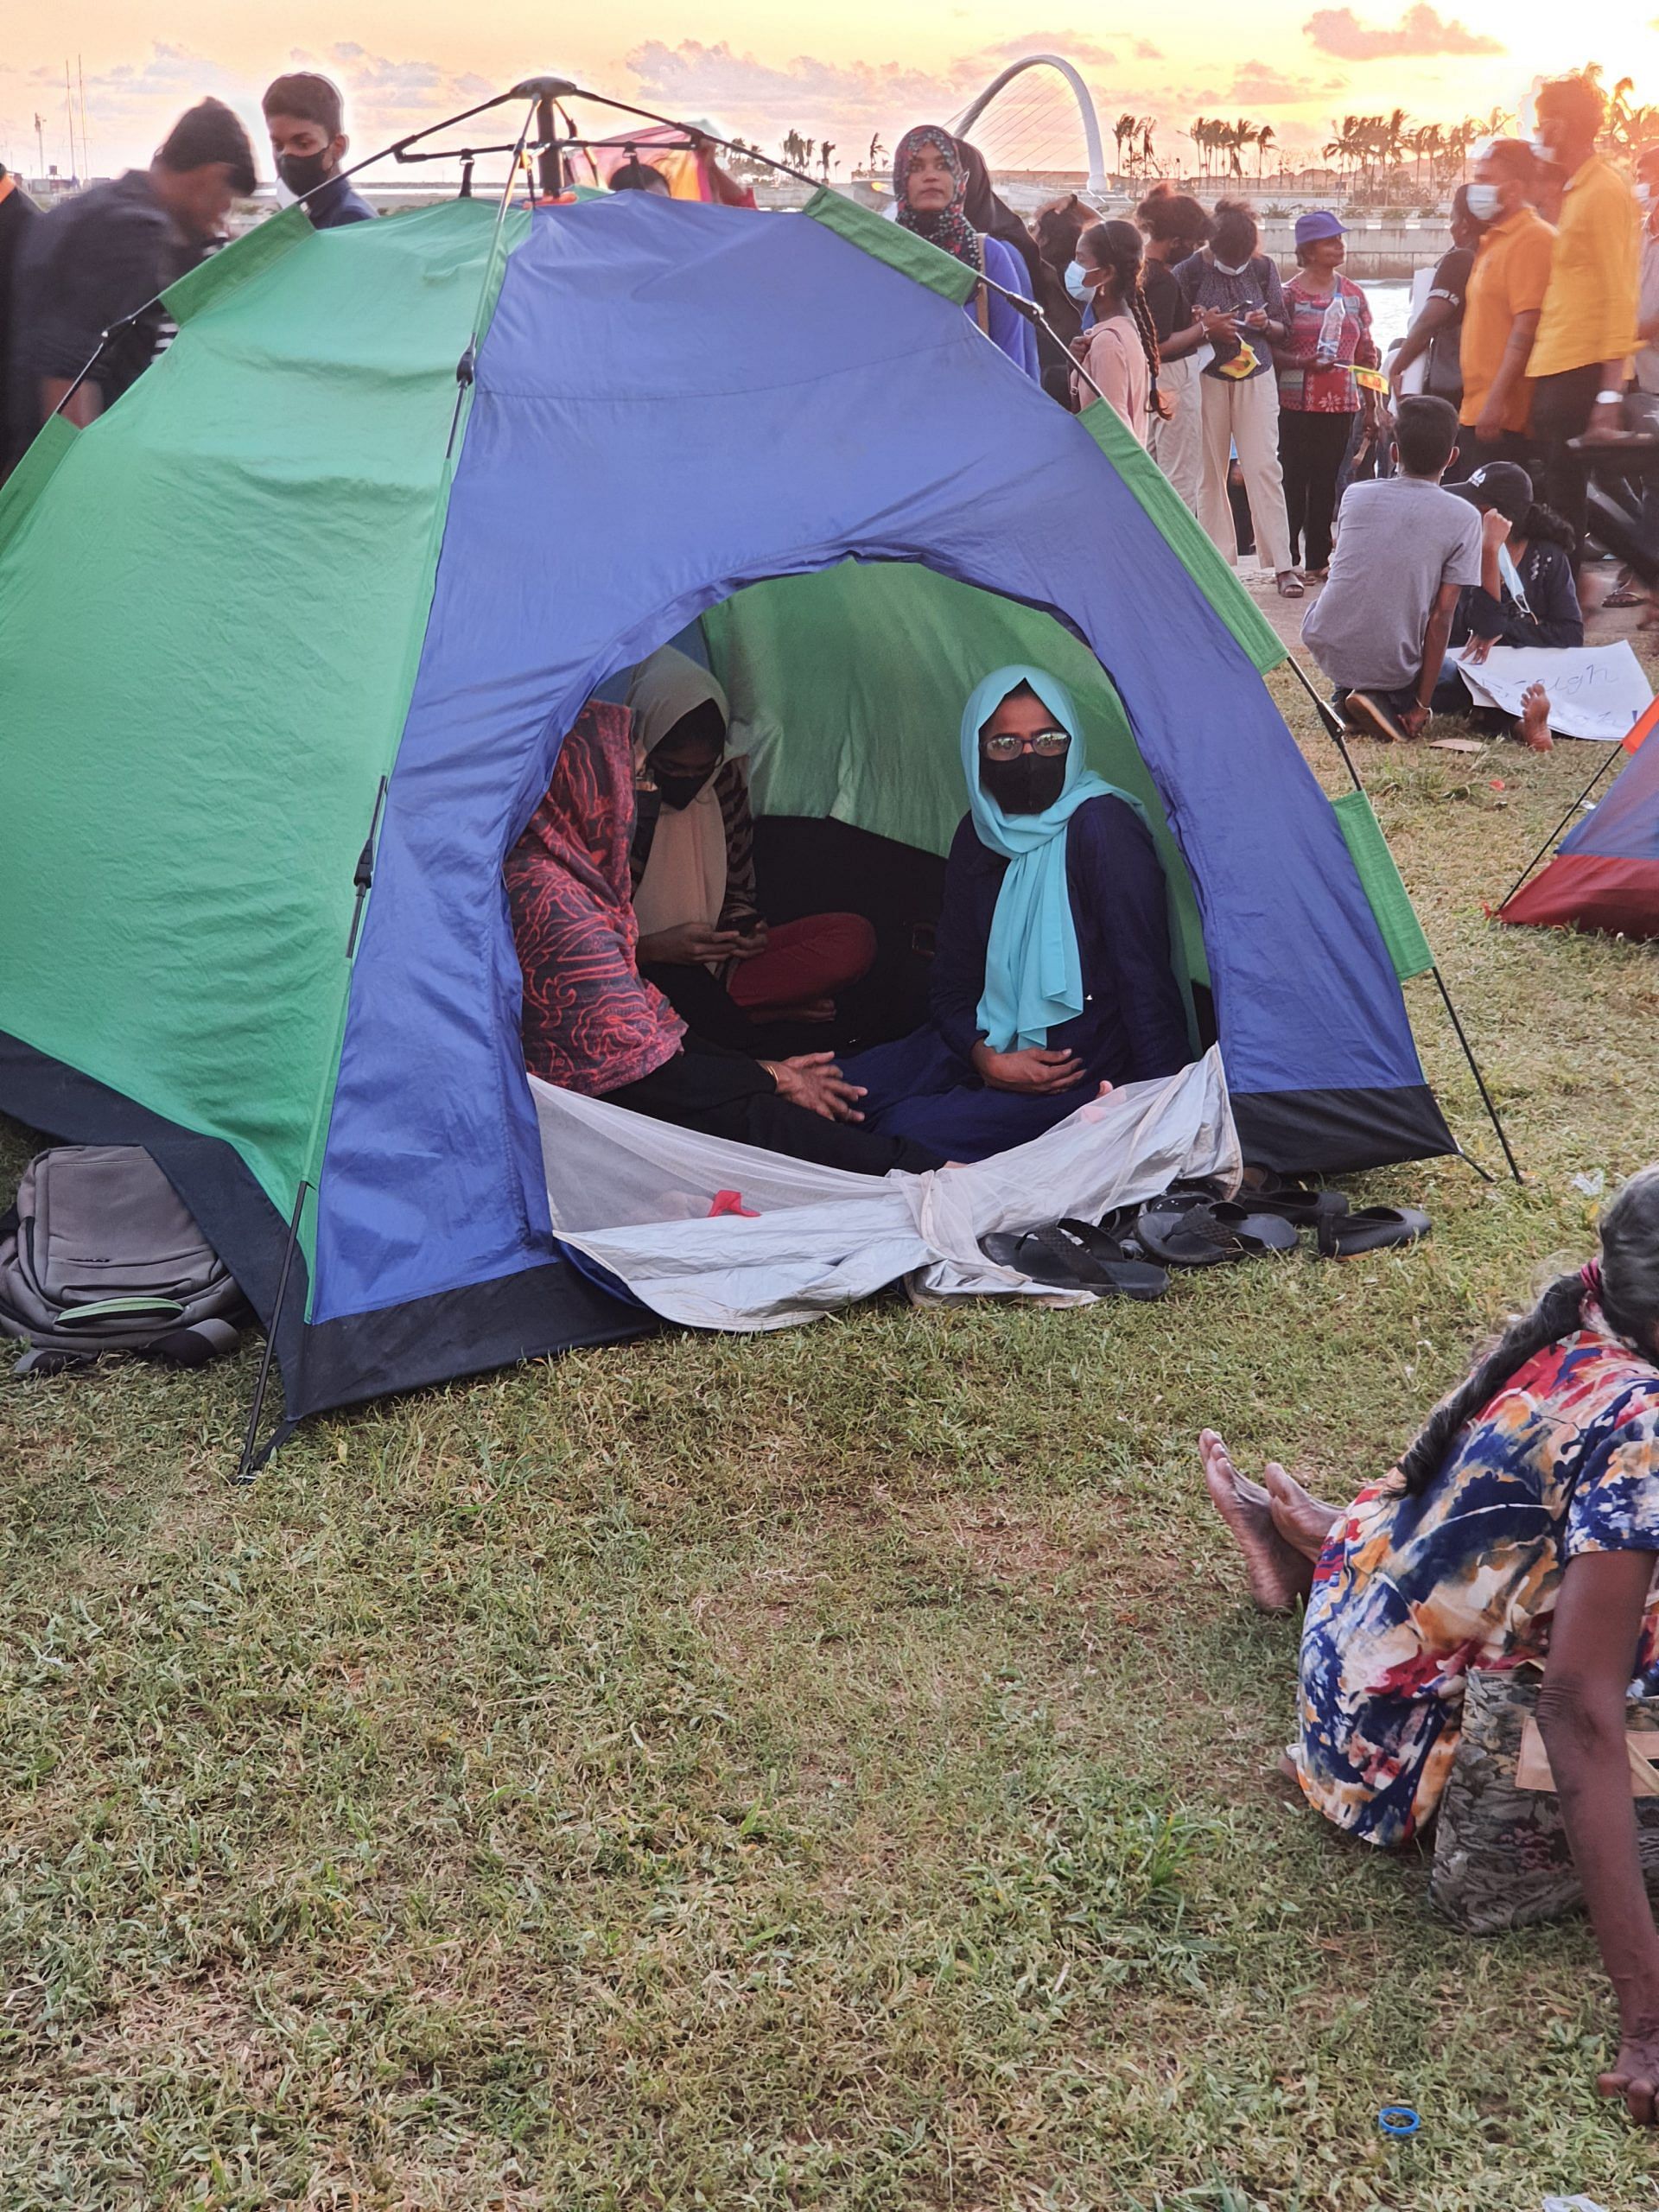 Scores of young men and women are now staying put day and night, right next to the Presidential Secretariat, in what looks like a tent city of resistance. | Photo: Regina Mihindukulasuriya